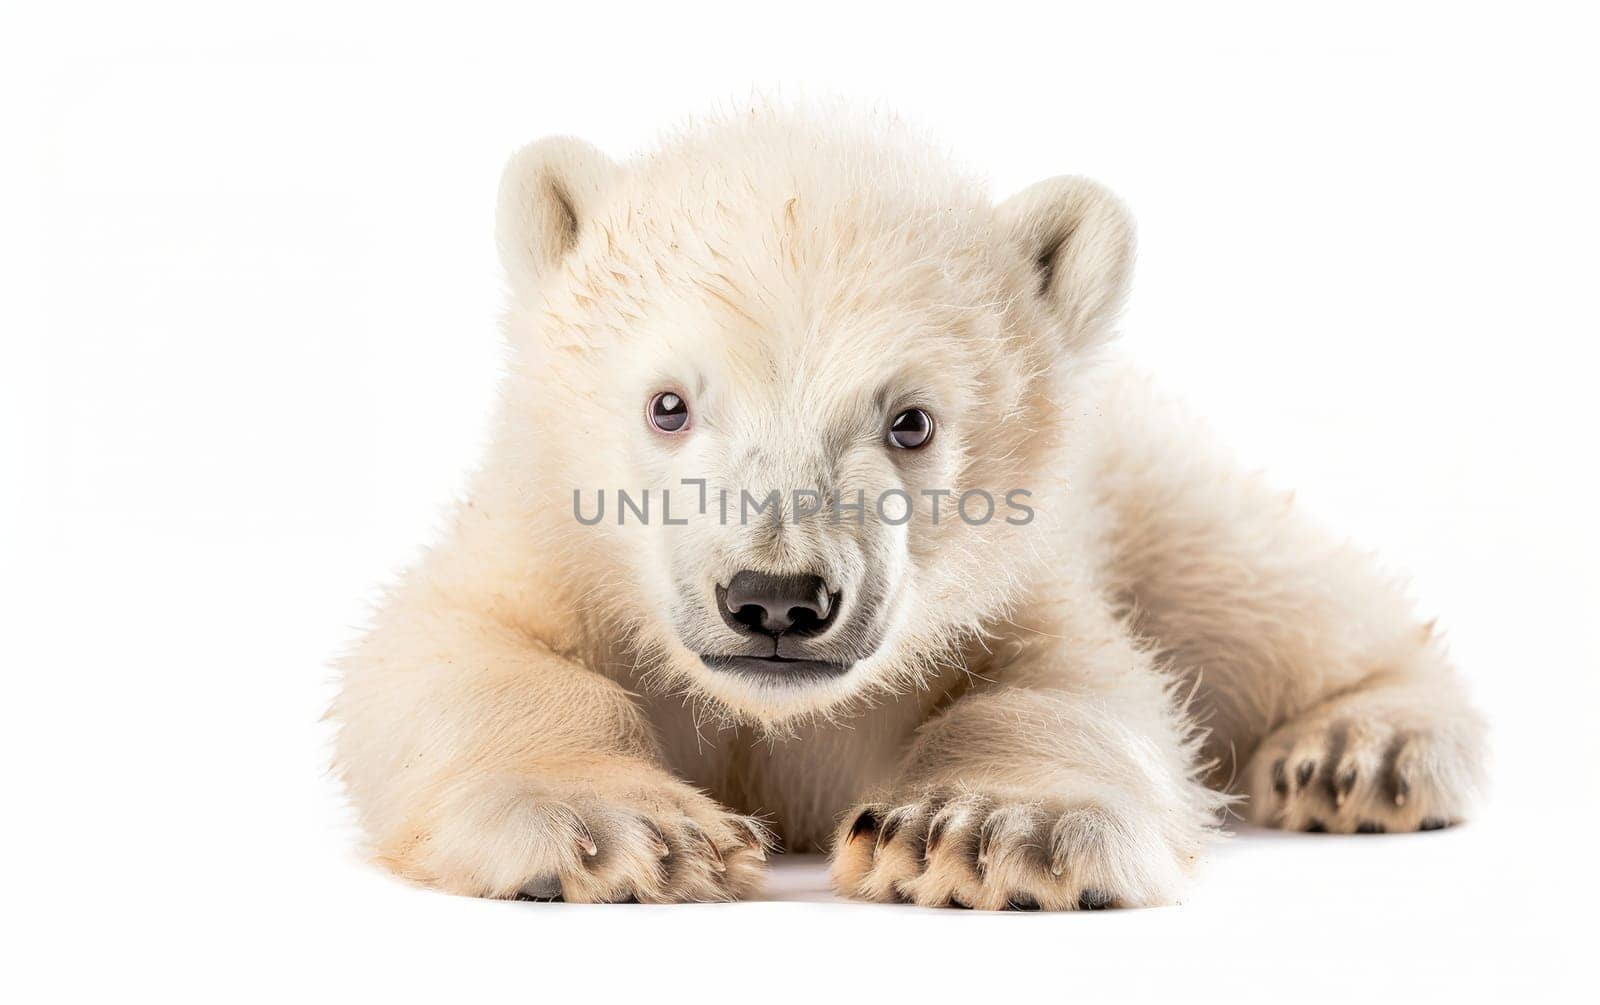 A polar bear cub lies comfortably against a white background, its innocence and vulnerability on full display. The cub's soft fur and relaxed posture create an image of peacefulness and playfulness. by sfinks